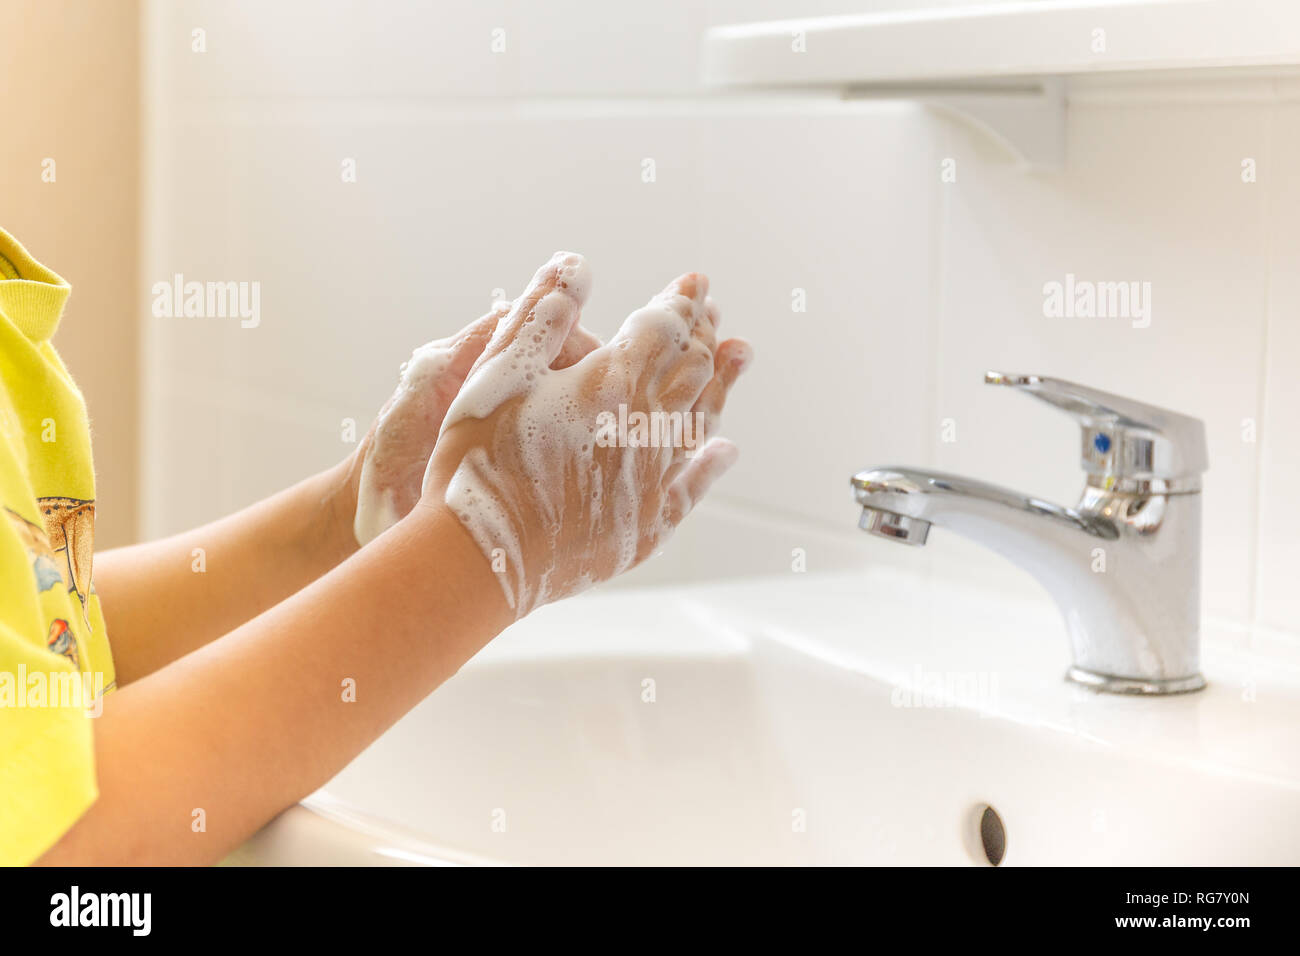 Children with soapy hands washed in bathroom sink. Stock Photo